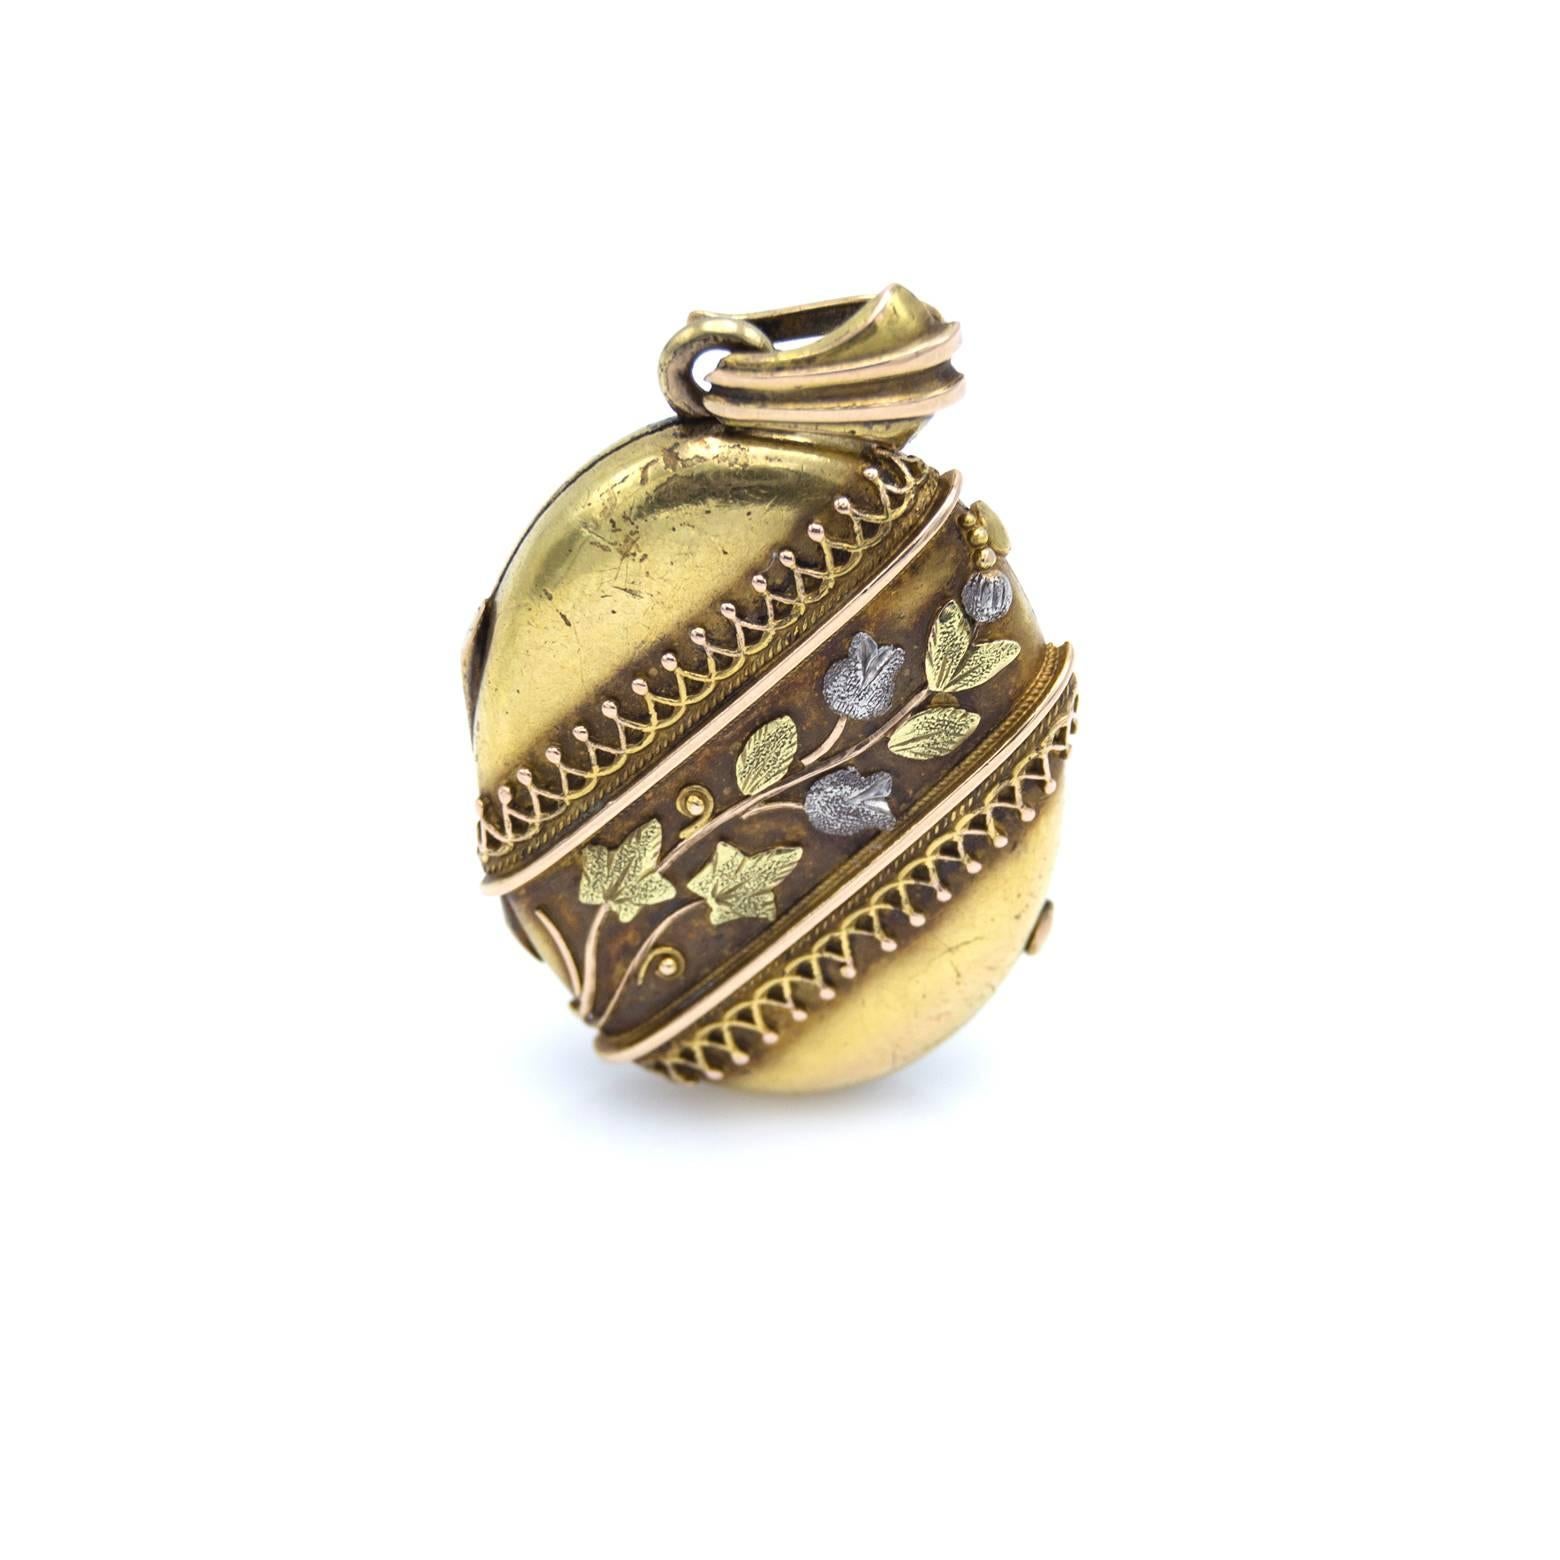 This antique locket is adorned with flowers and leaves in many shades of gold and the romance of this piece is timeless. Green gold, rose gold, platinum and yellow gold create this masterpiece. The flowers and leaves dance with spirals as if  being